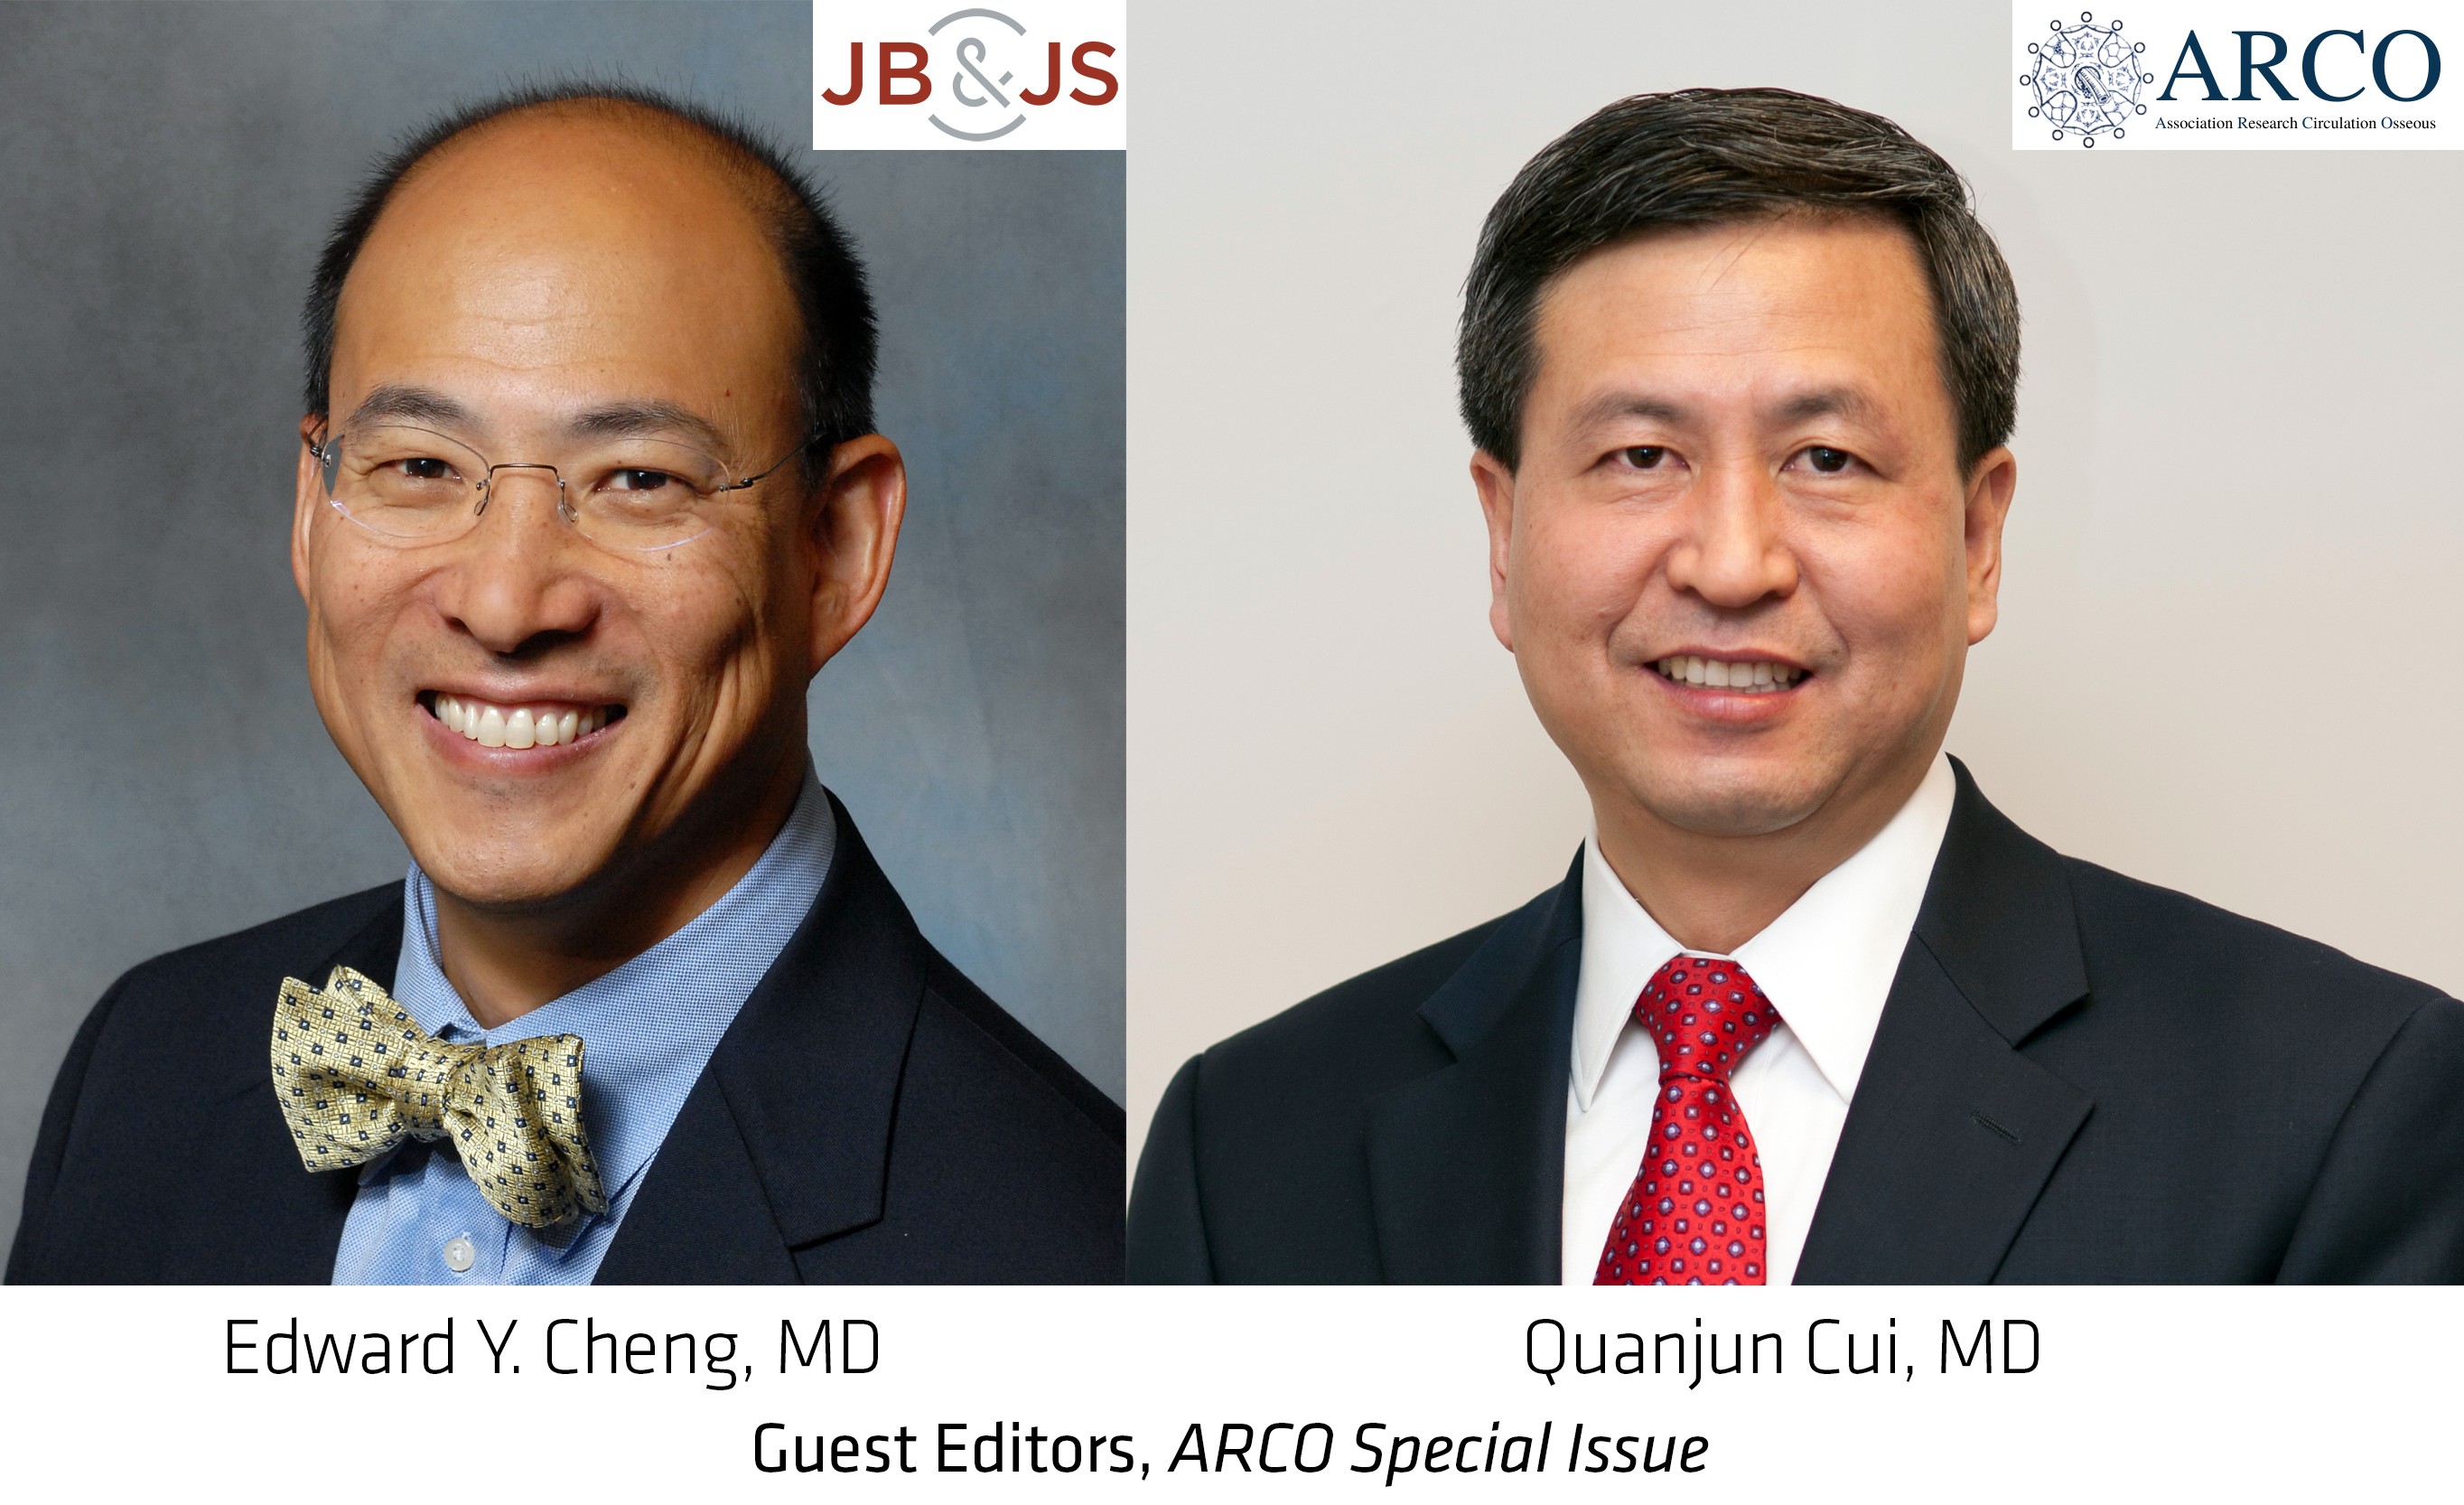 Edward Y. Cheng, MD and Quanjun Cui, MD